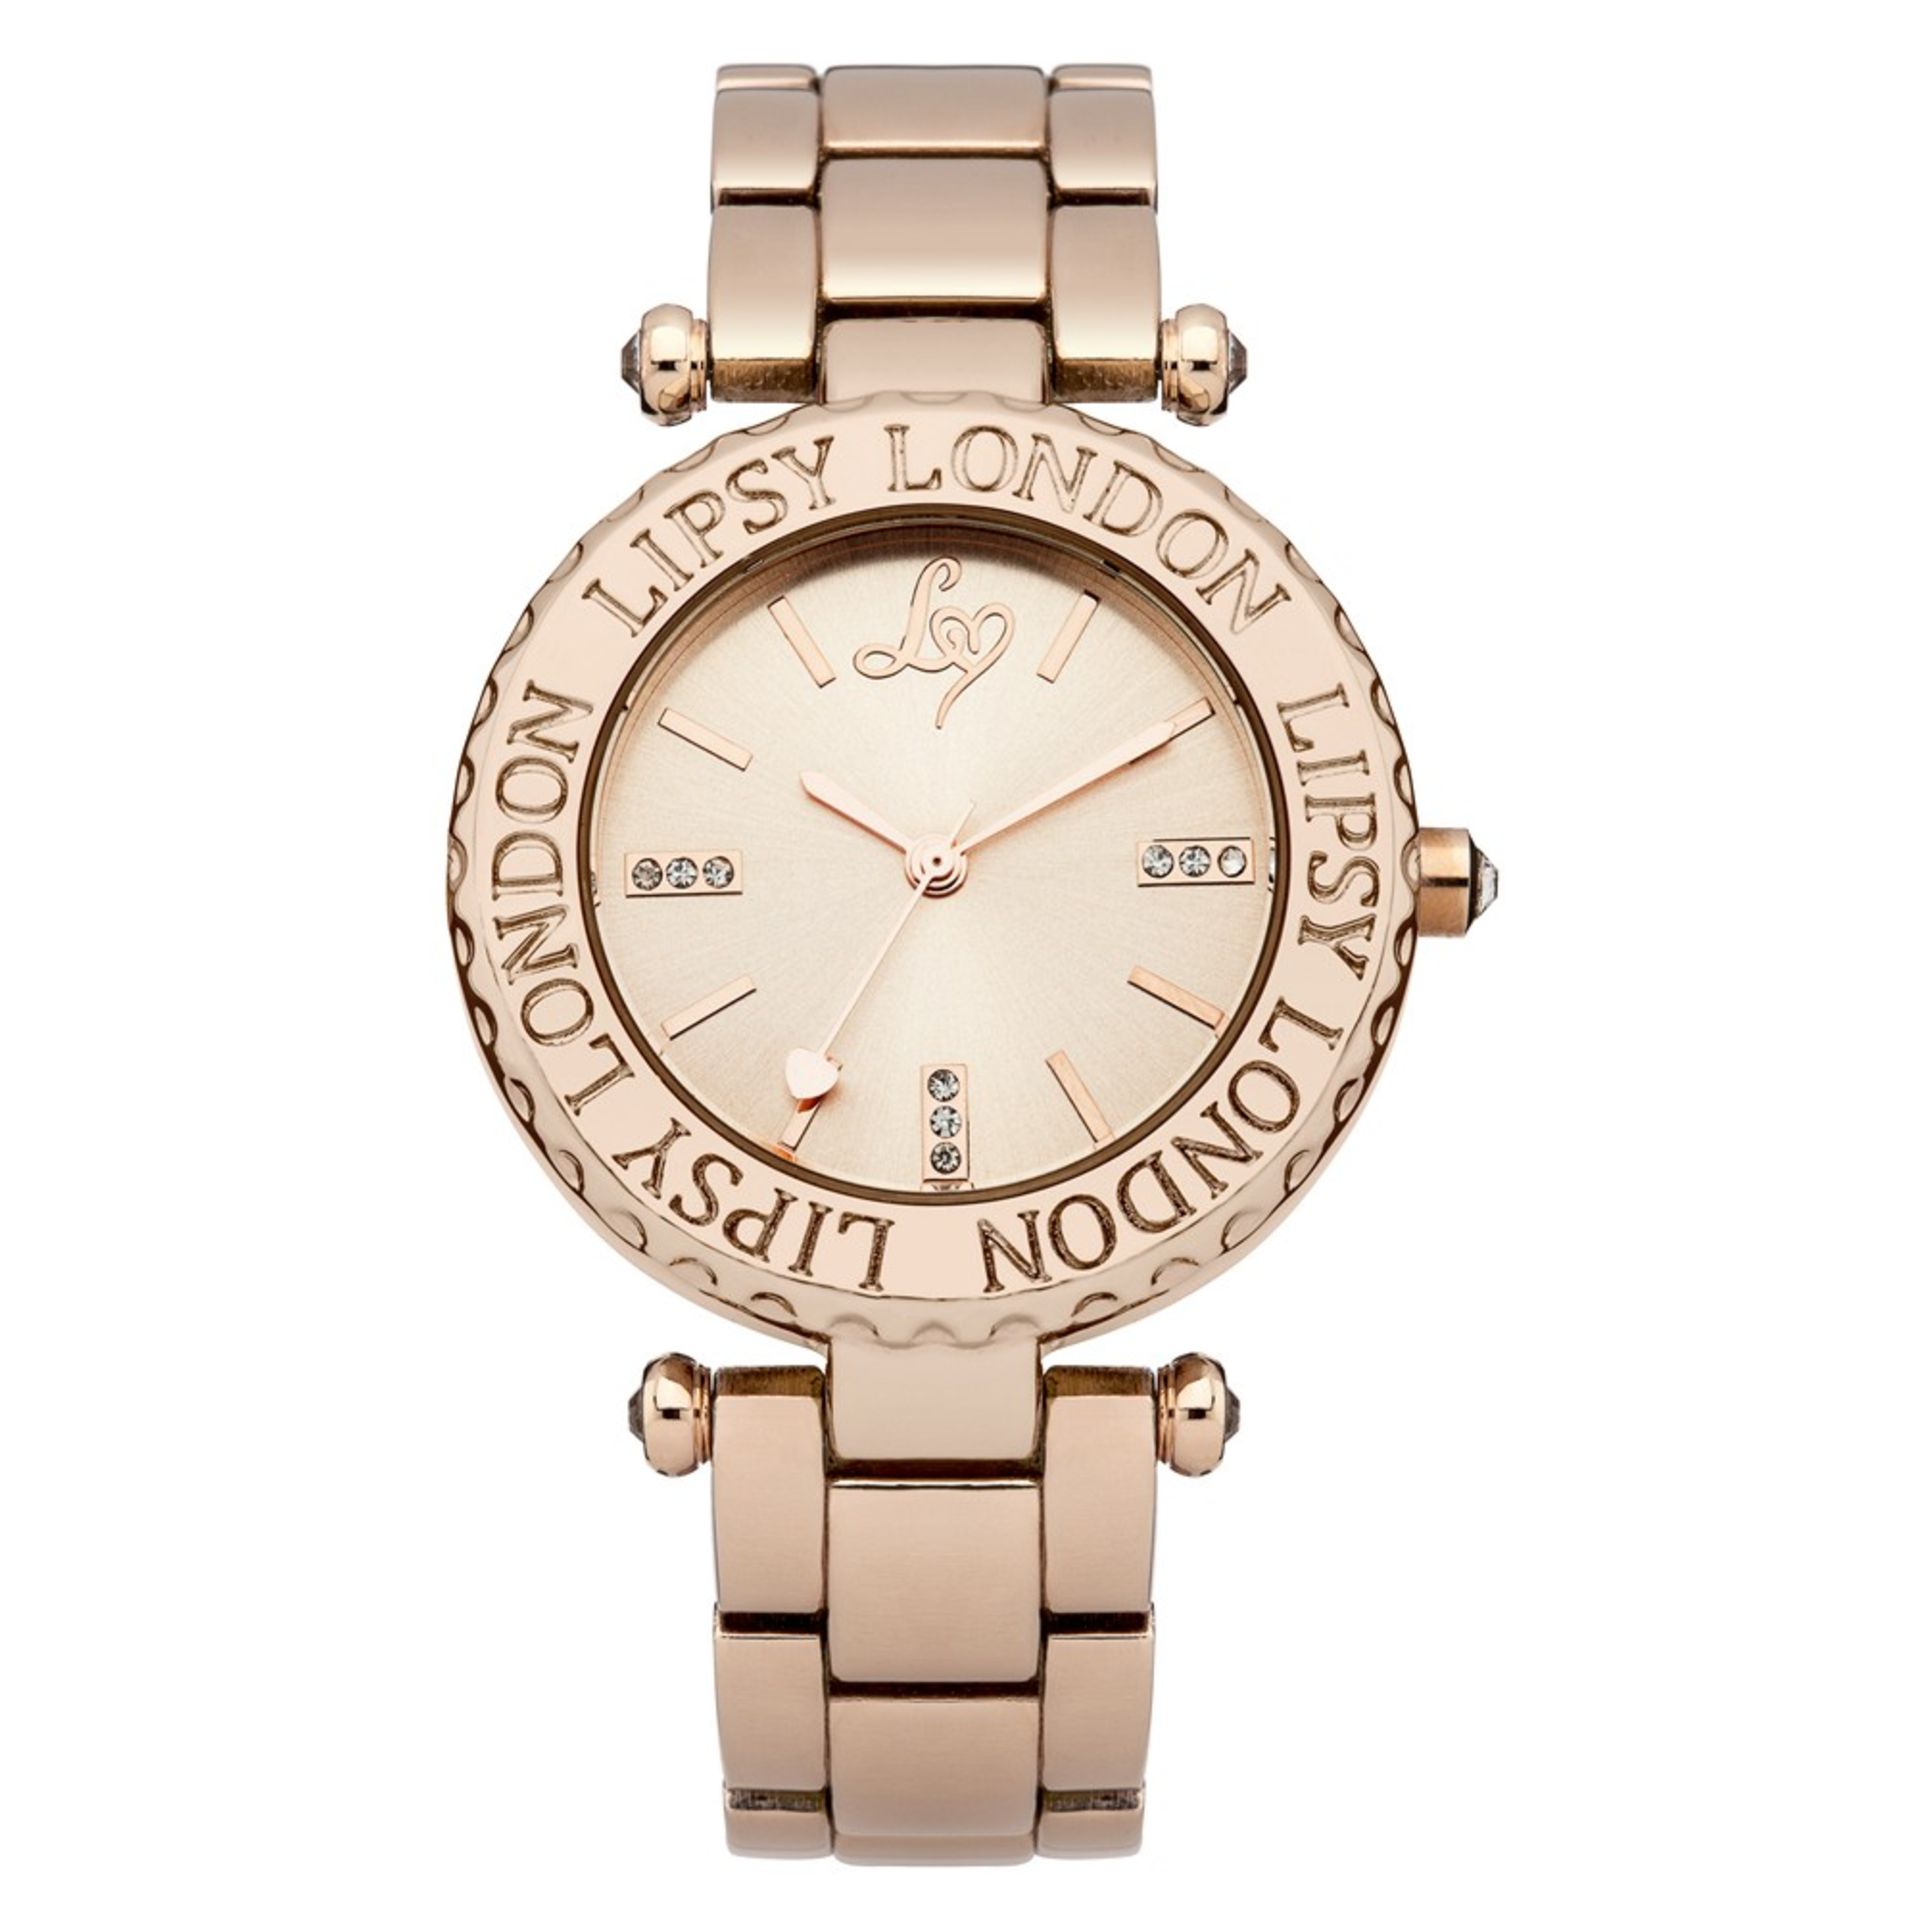 Boxed Brand New, LIPSY LADIES ROSE GOLD COLOURED BRACELET WATCH WITH ROLE GOLD COLOURED DIAL, RRP-£